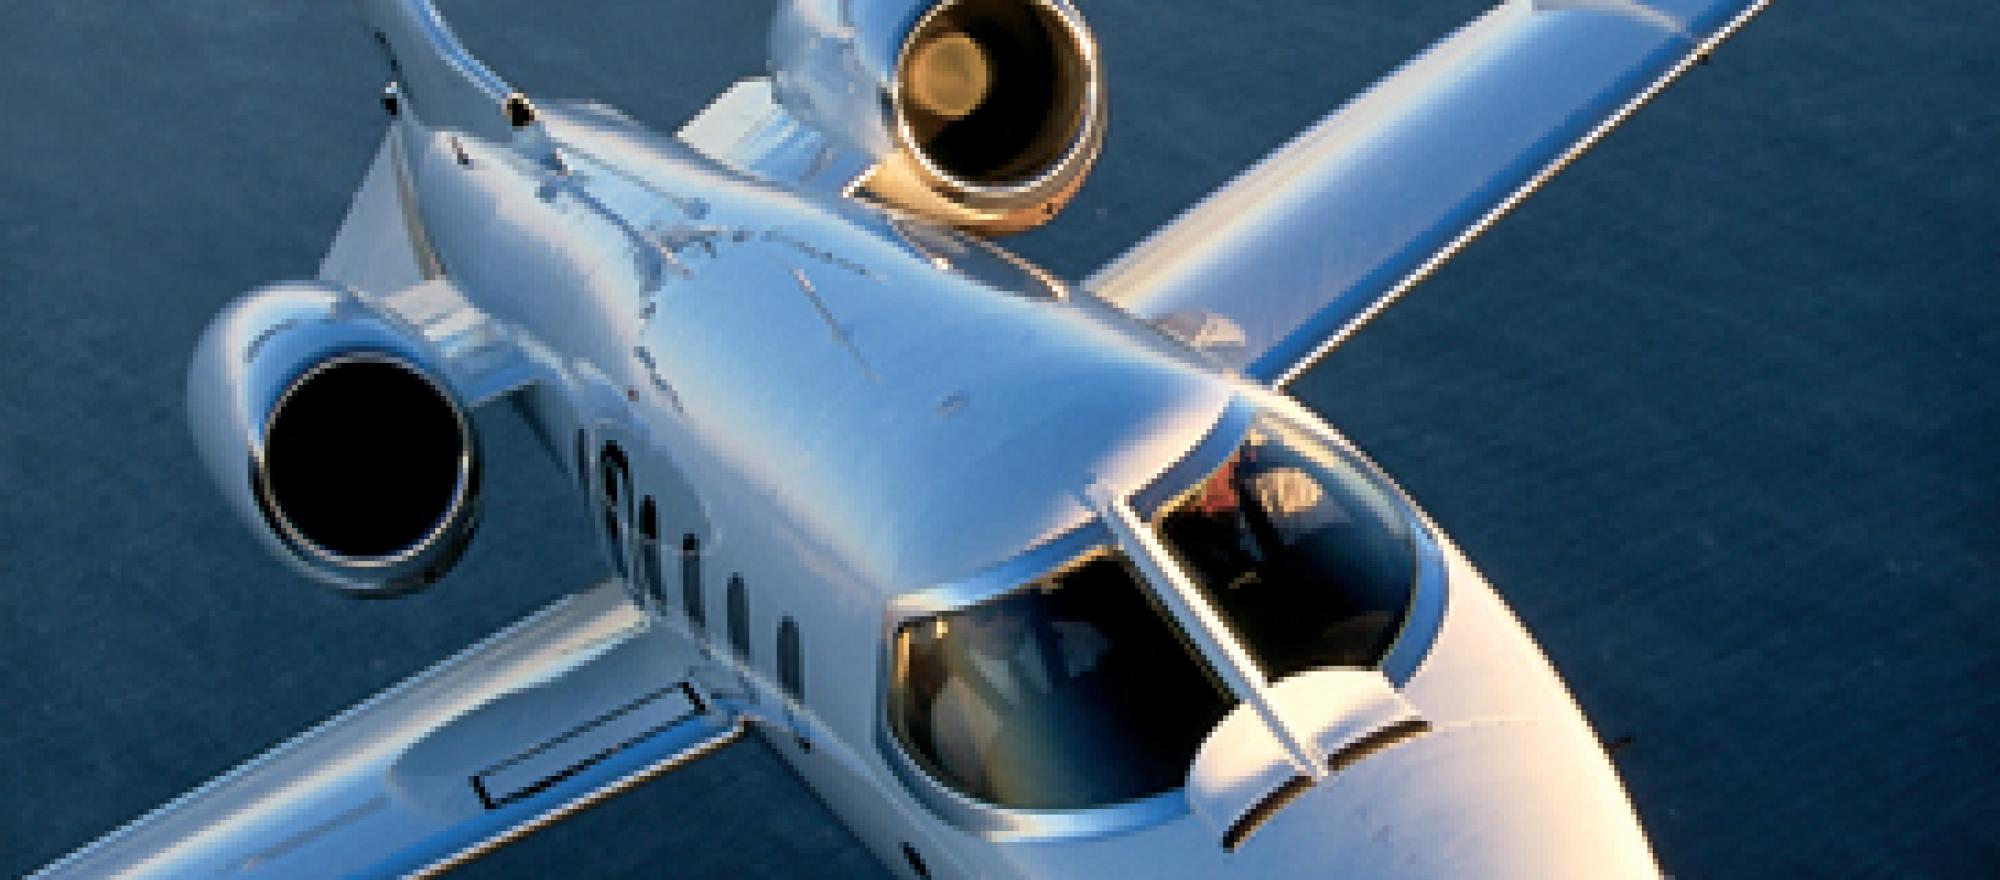 The Learjet 31 honored both pocket-rocket legacy and the Spartan cabin spir